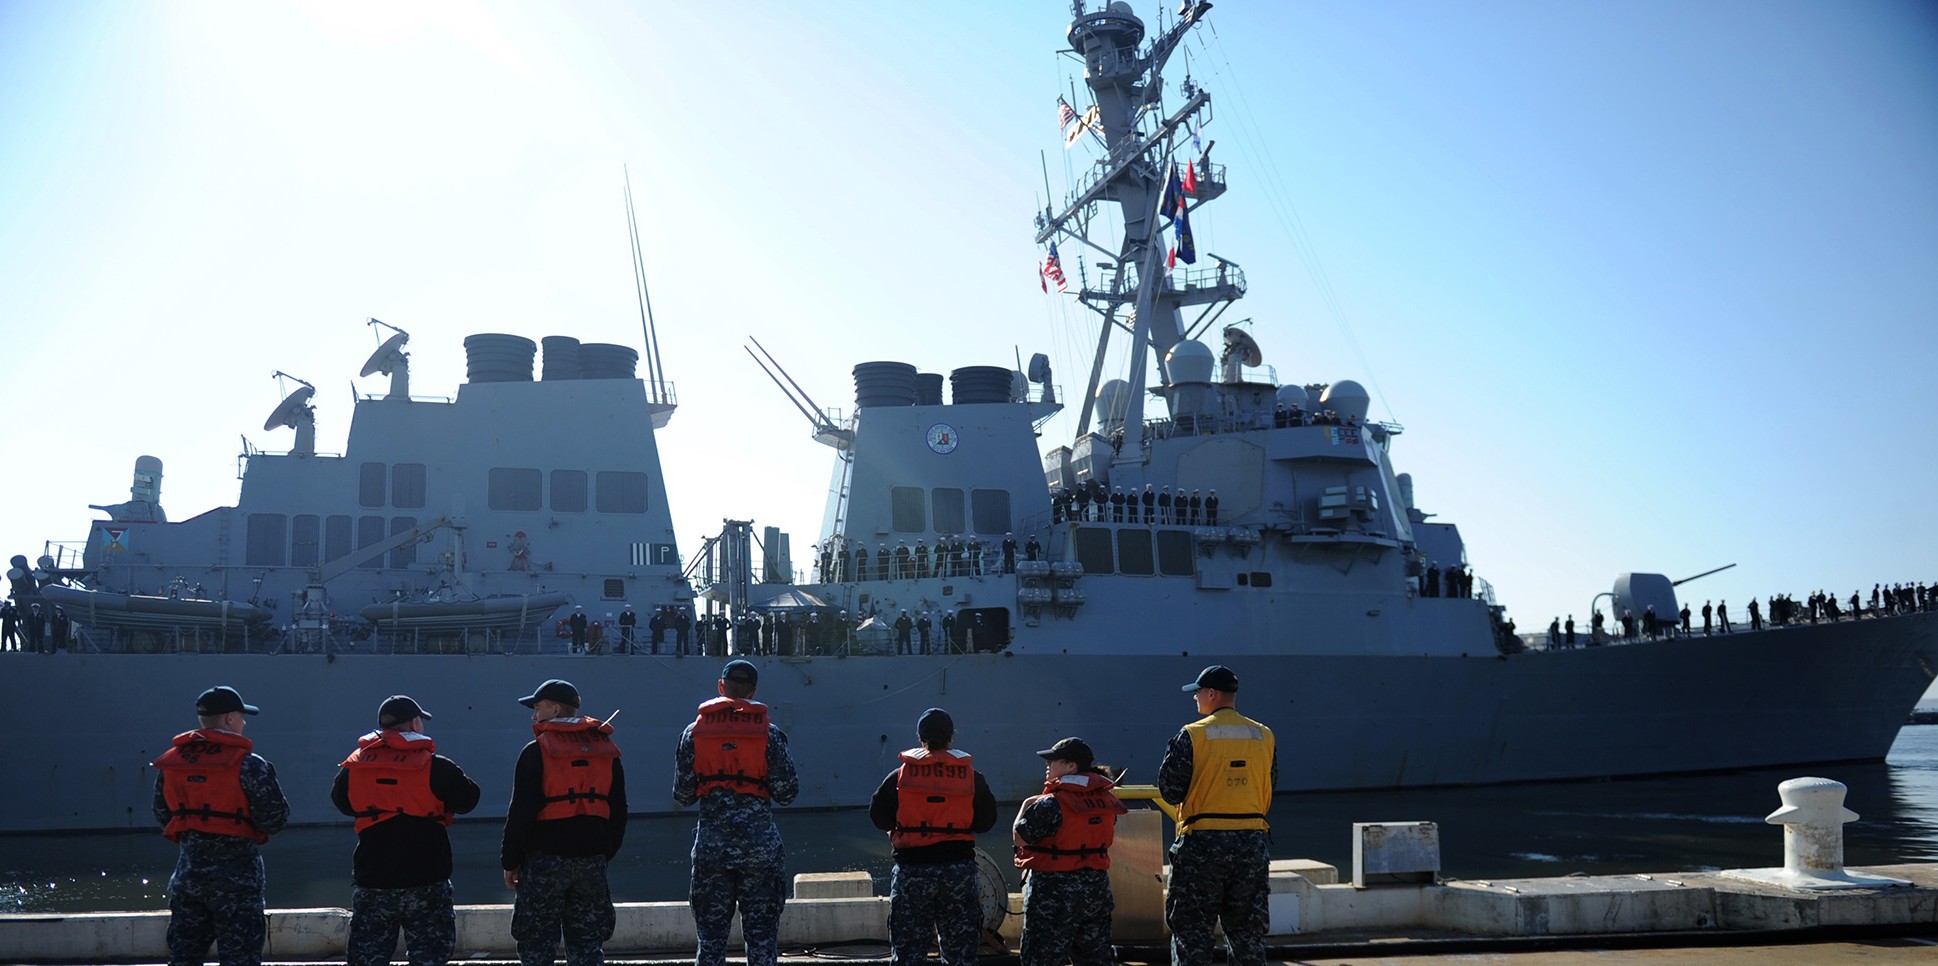 ddg-72 uss mahan guided missile destroyer arleigh burke class aegis bmd 08